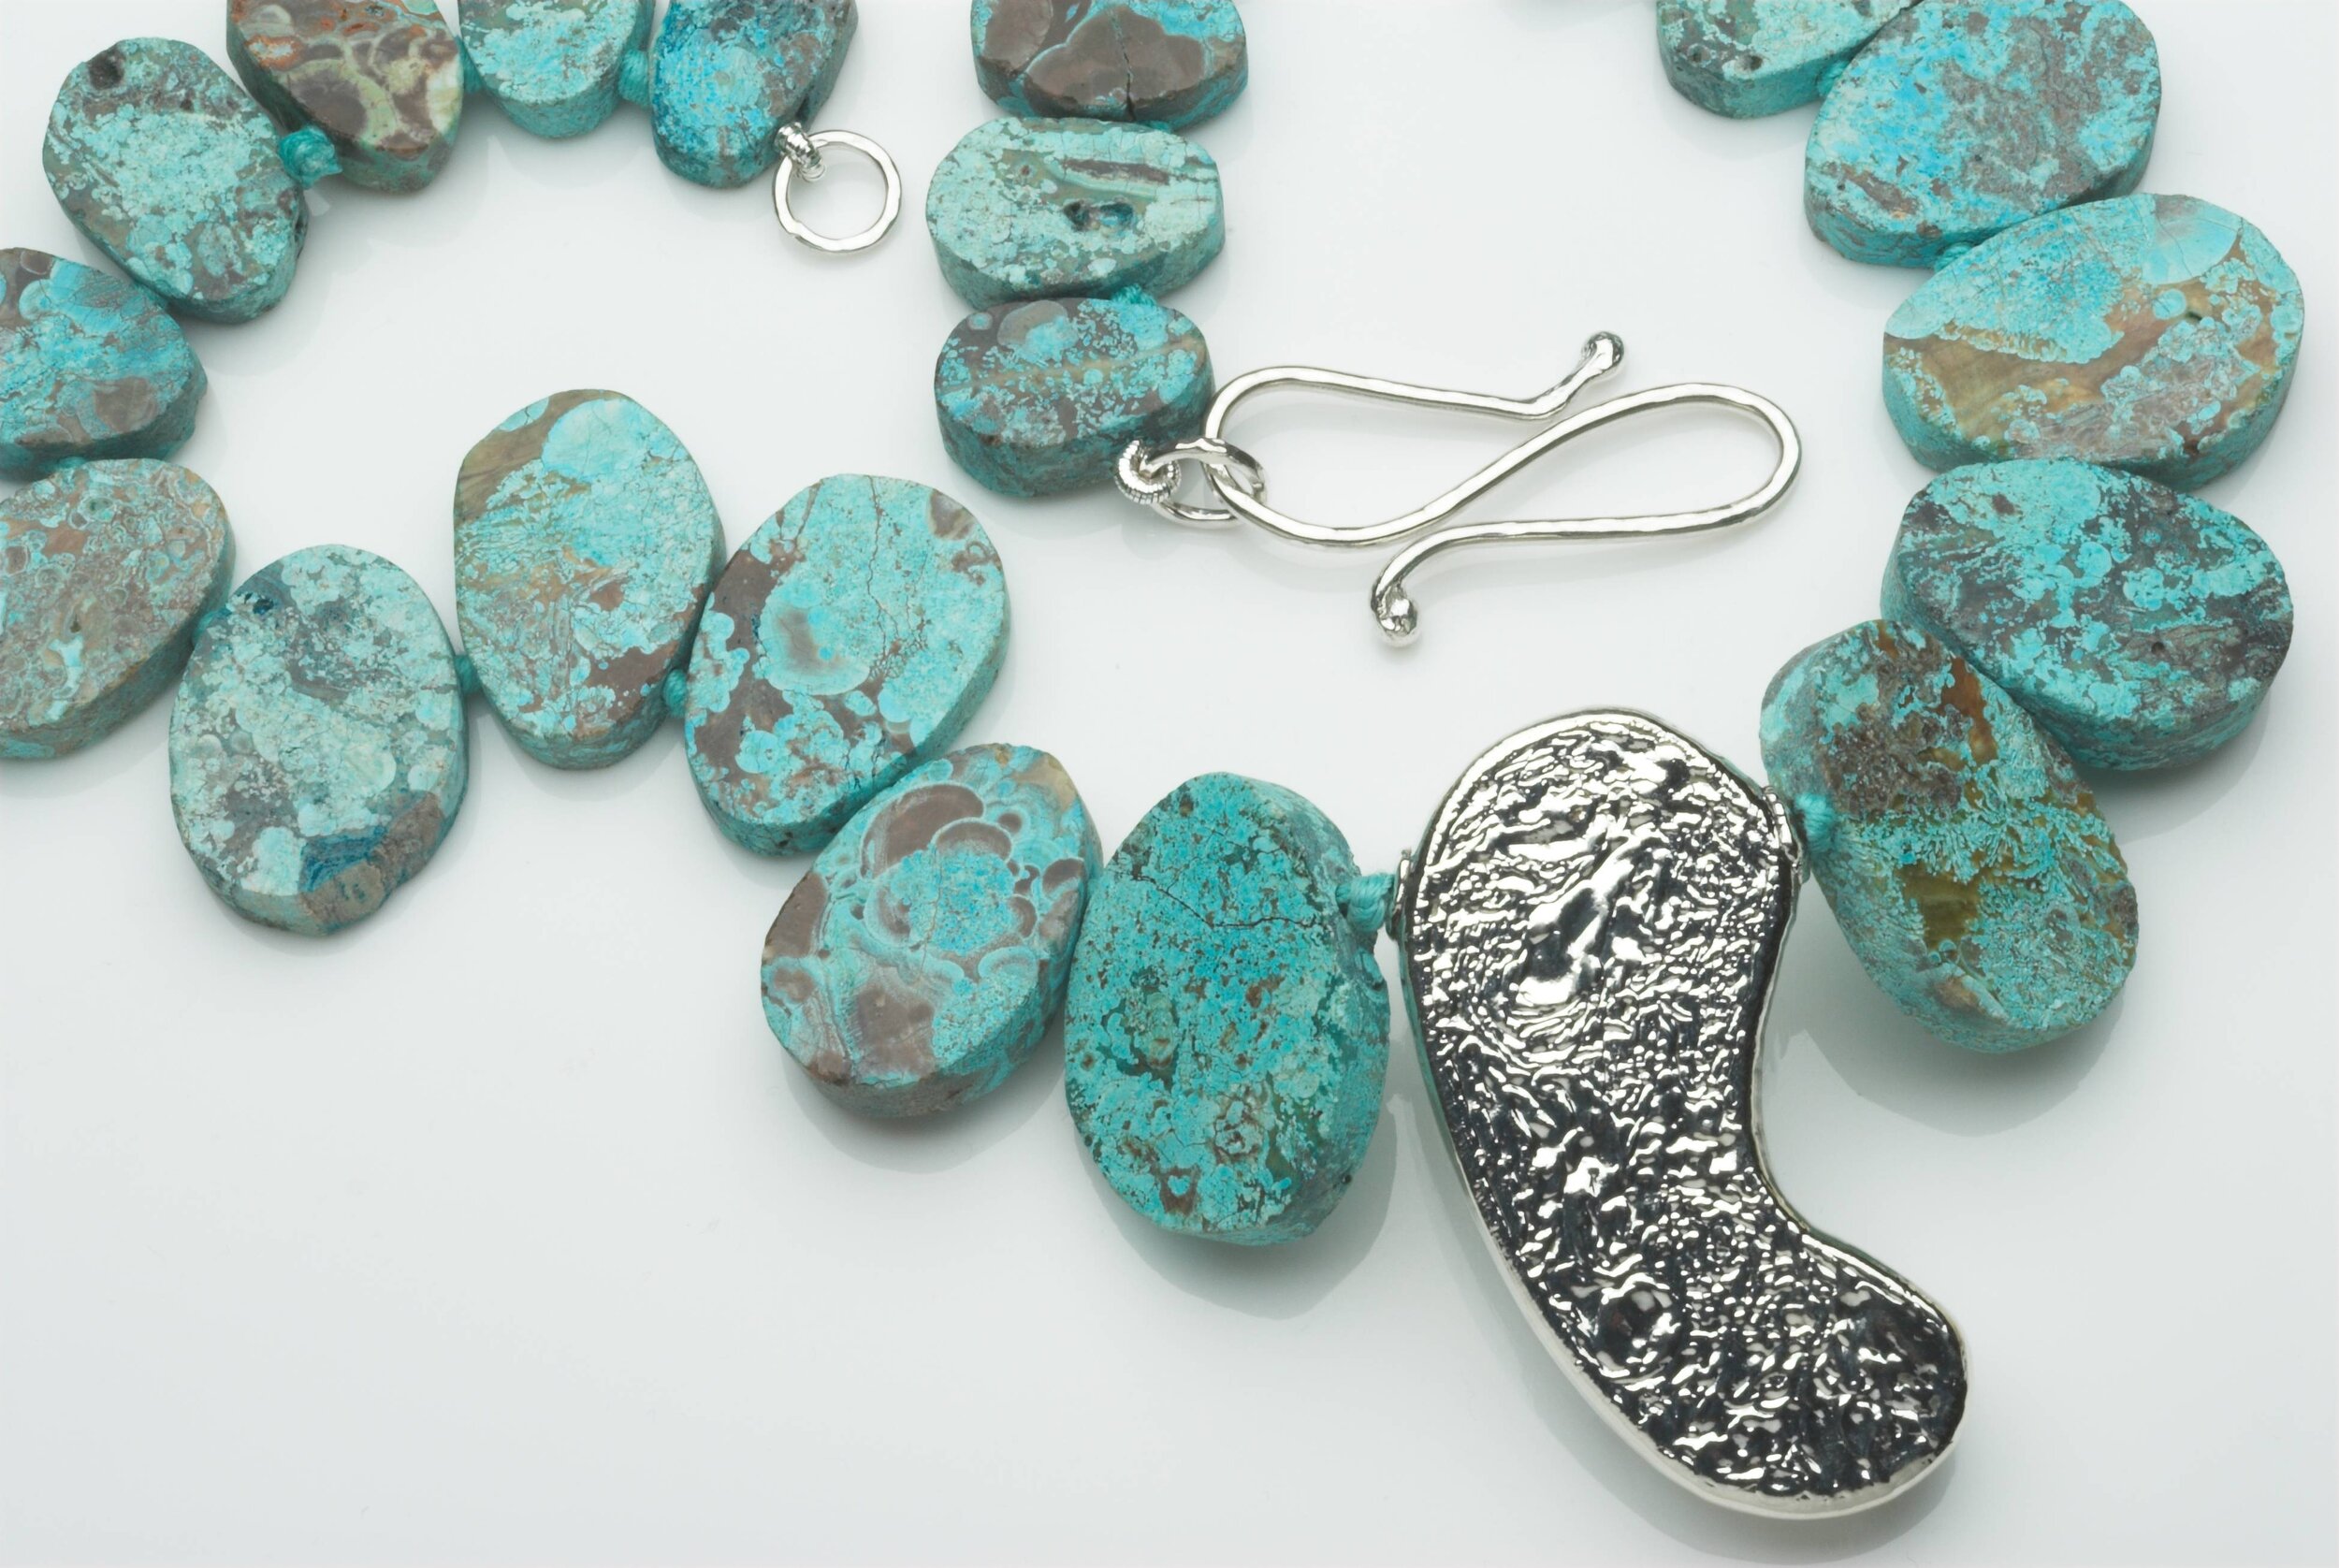 Chrysocolla Necklace with silver hallmarked shape £750.jpg